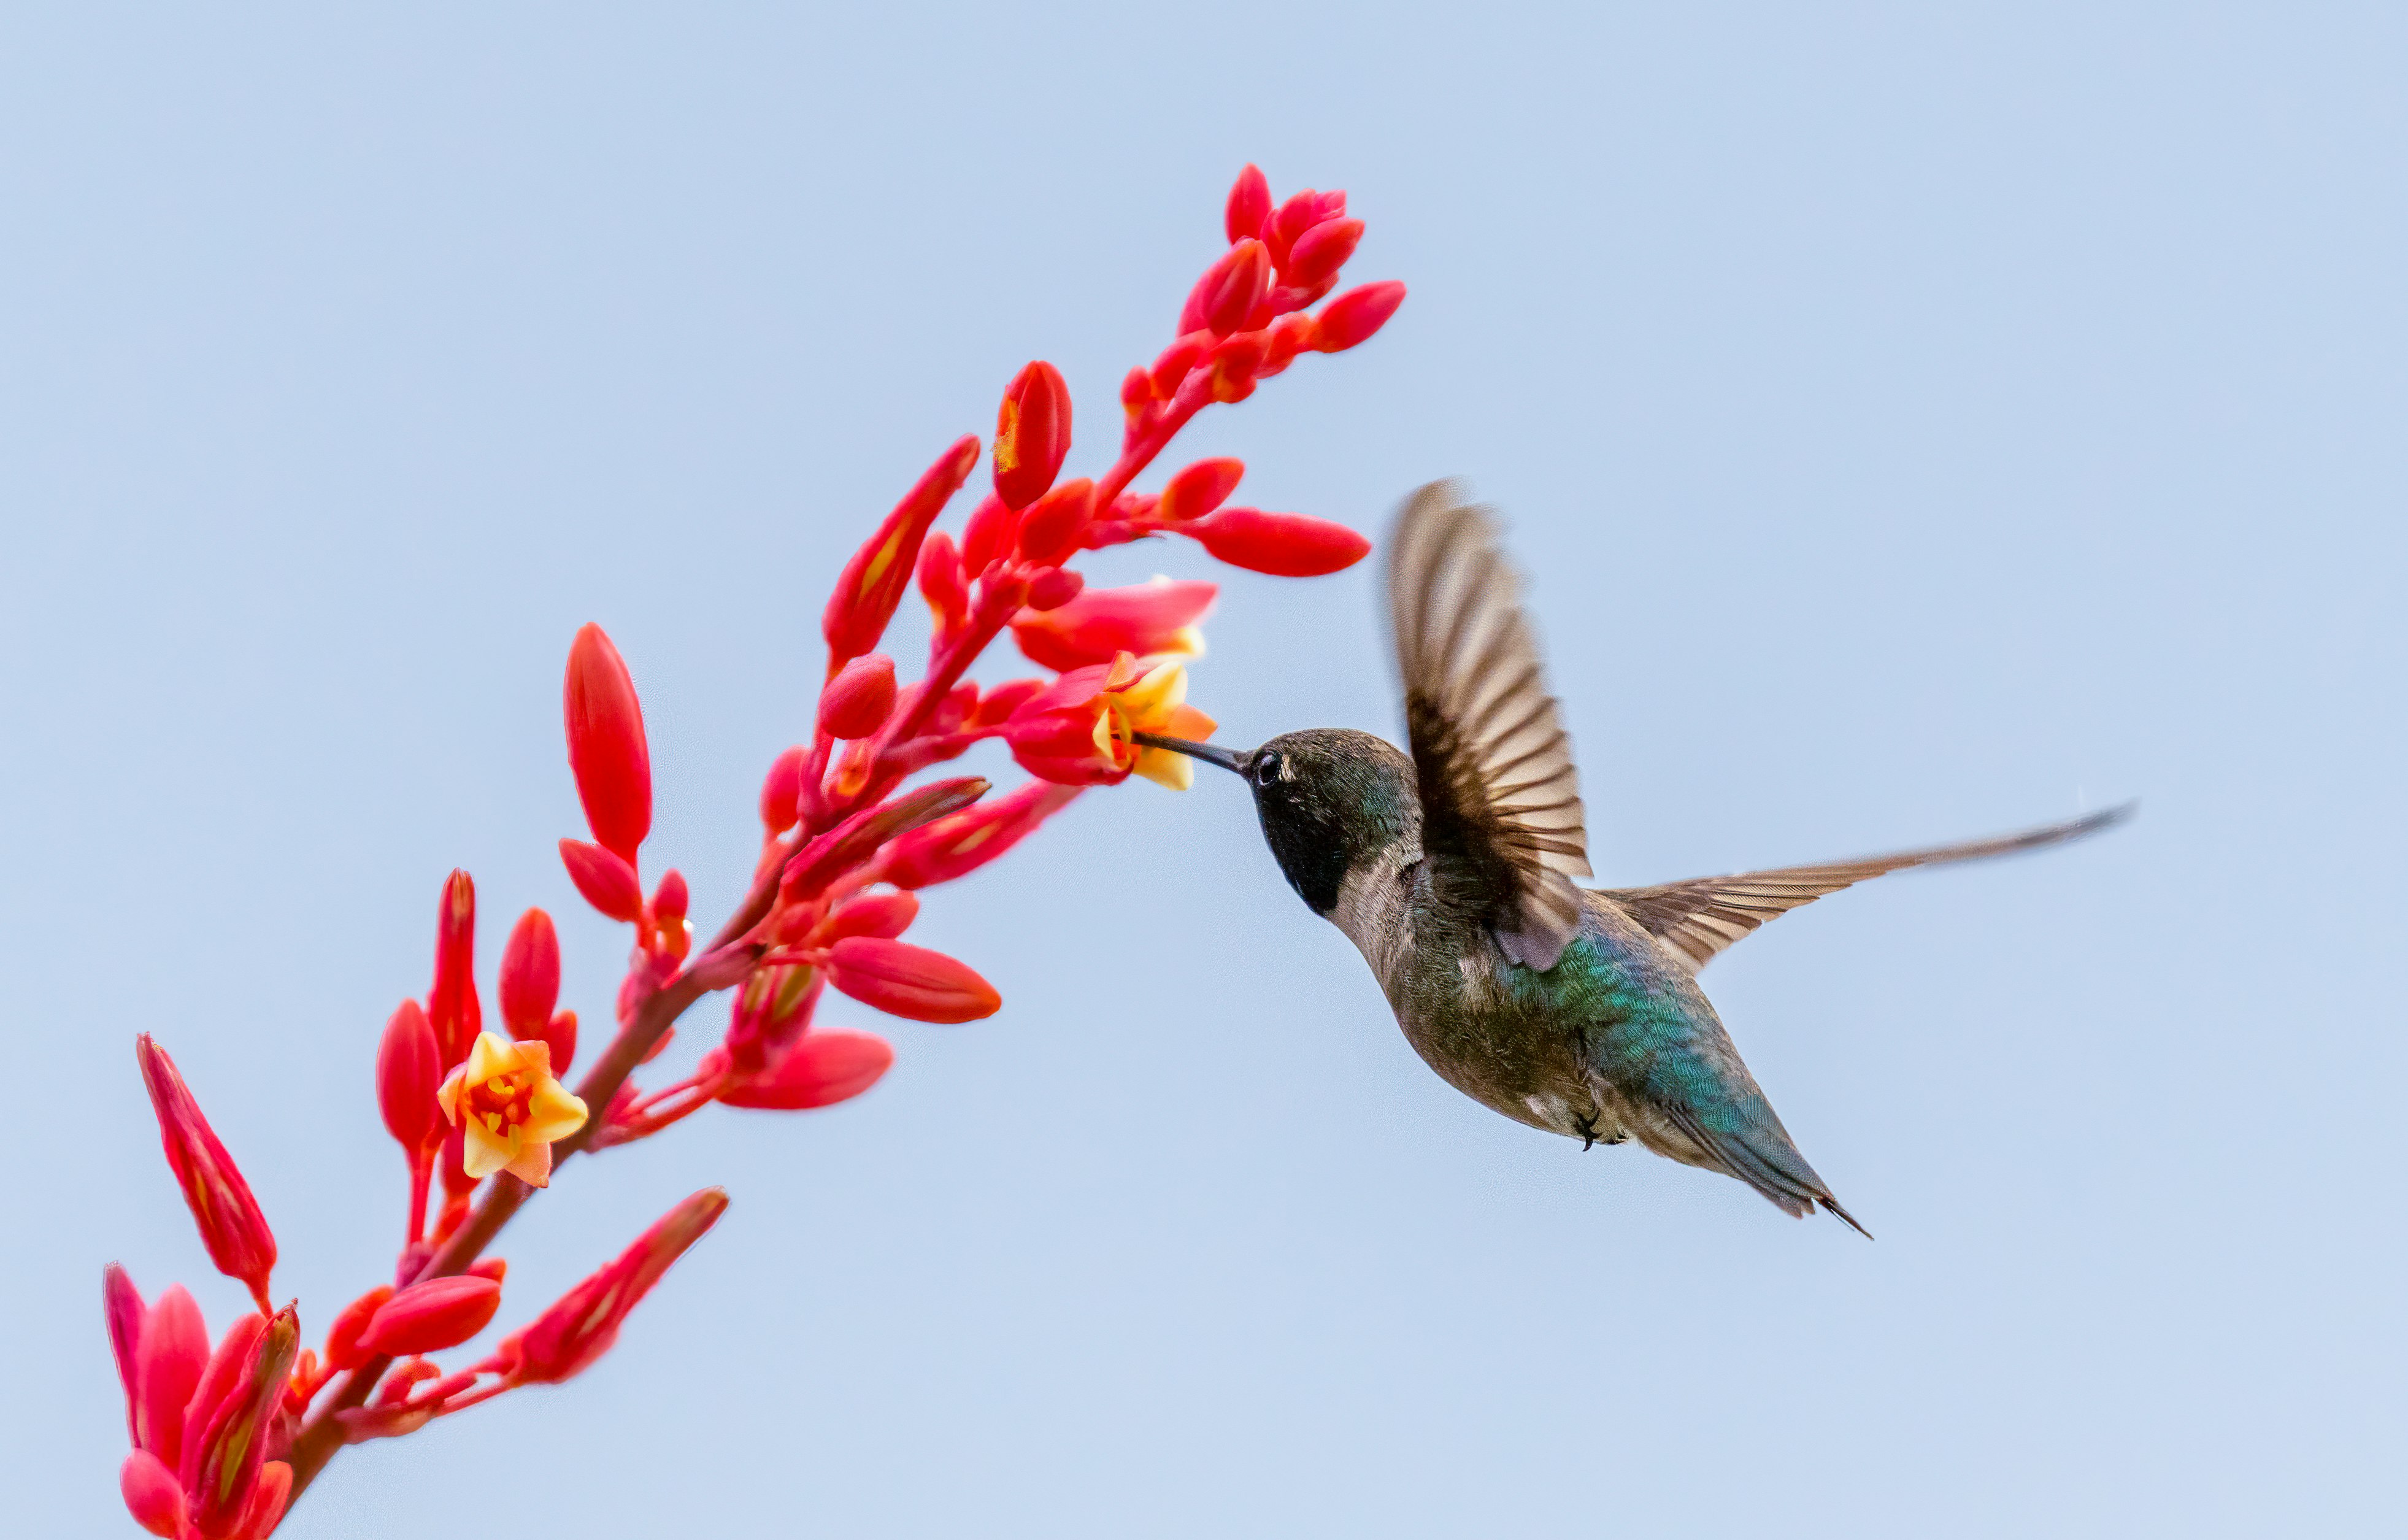 green and brown humming bird flying over red flowers